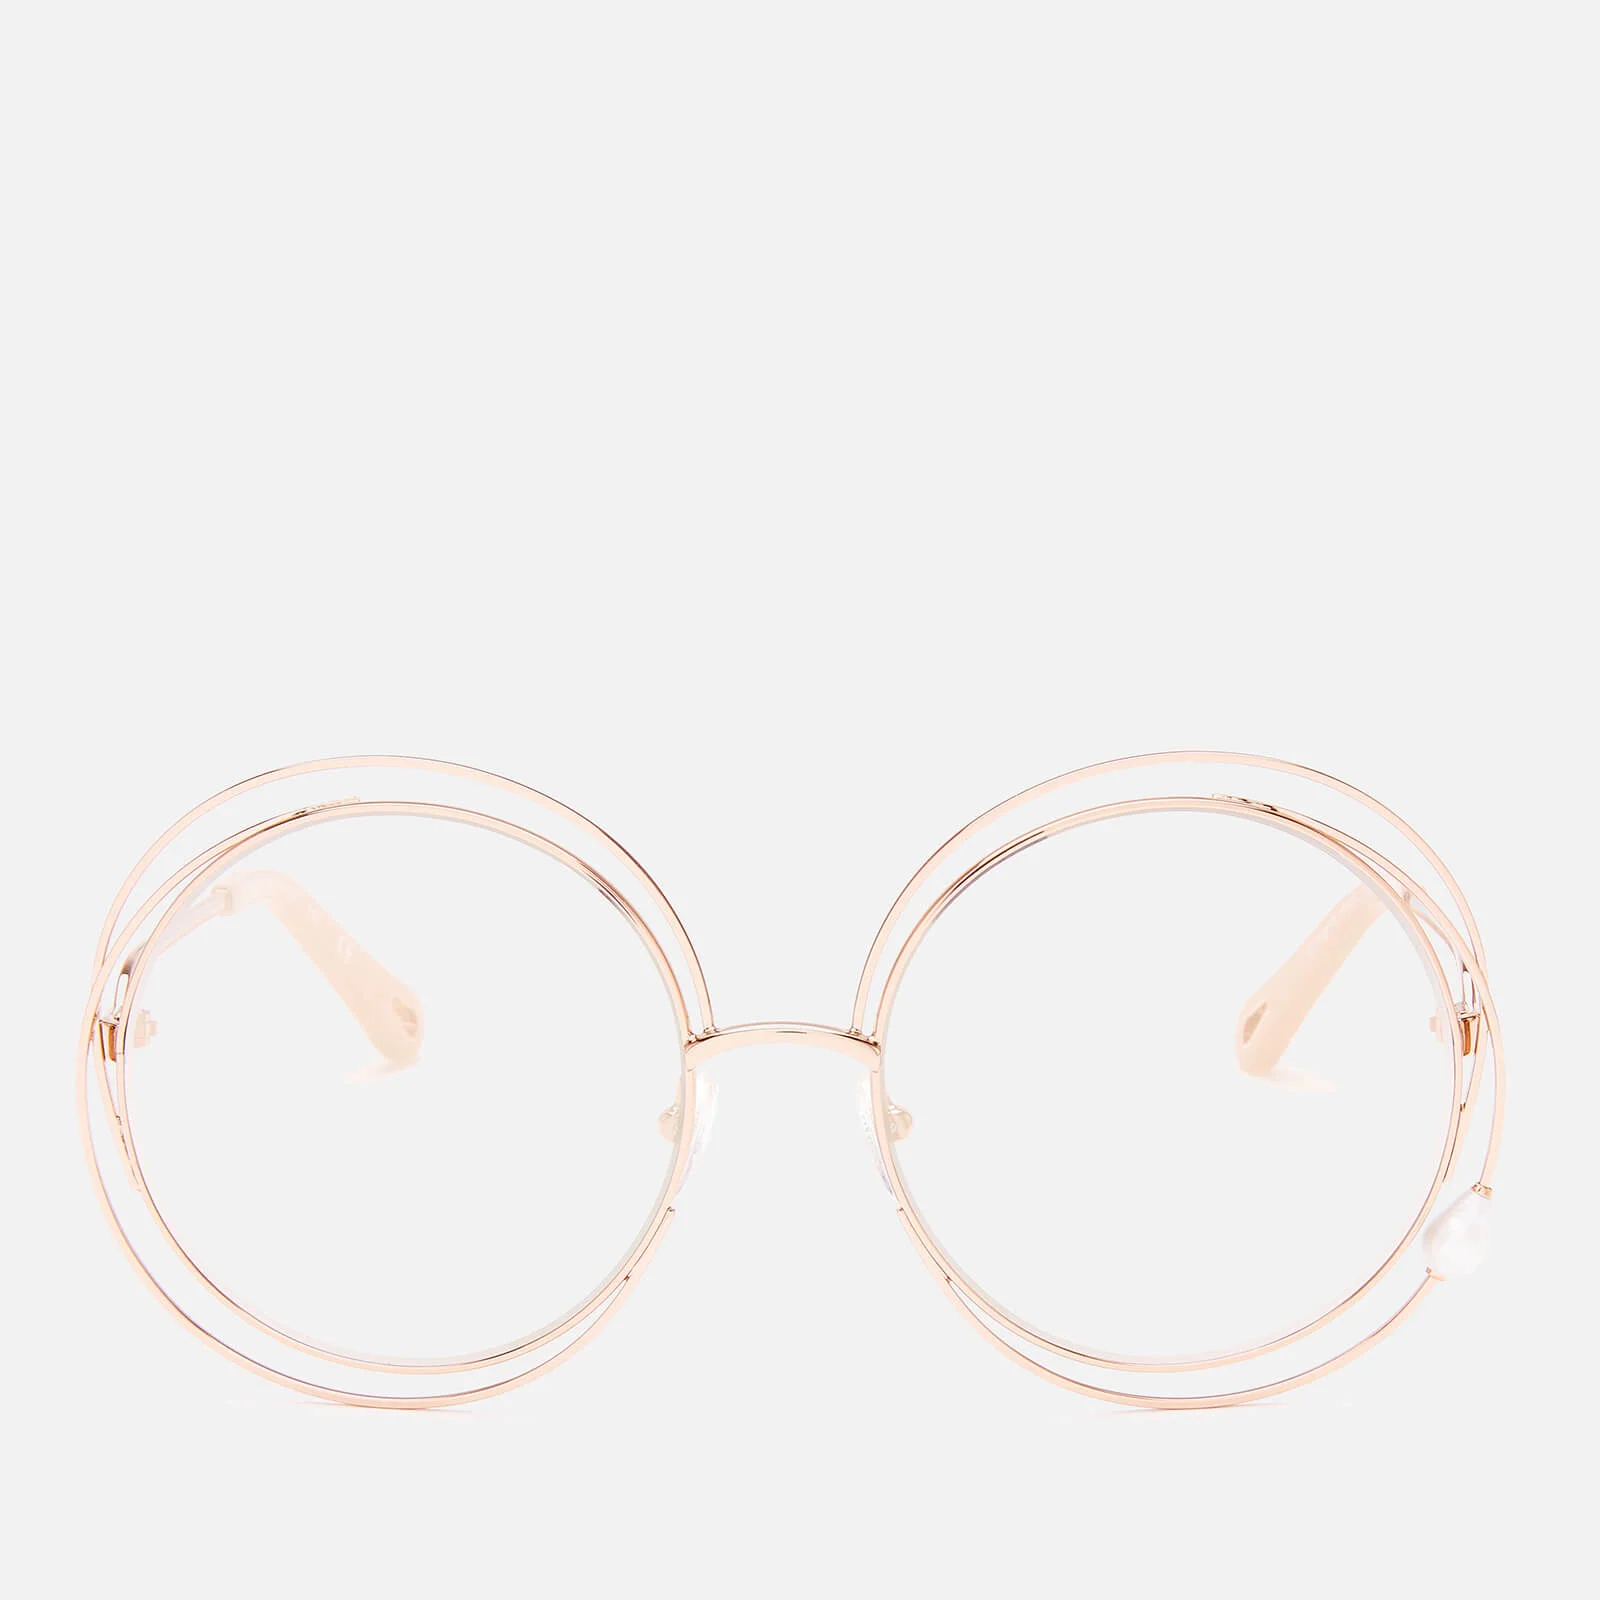 Chloé Women's Carlina Pearl Round Frame Sunglasses - Rose Gold/Pearl Image 1